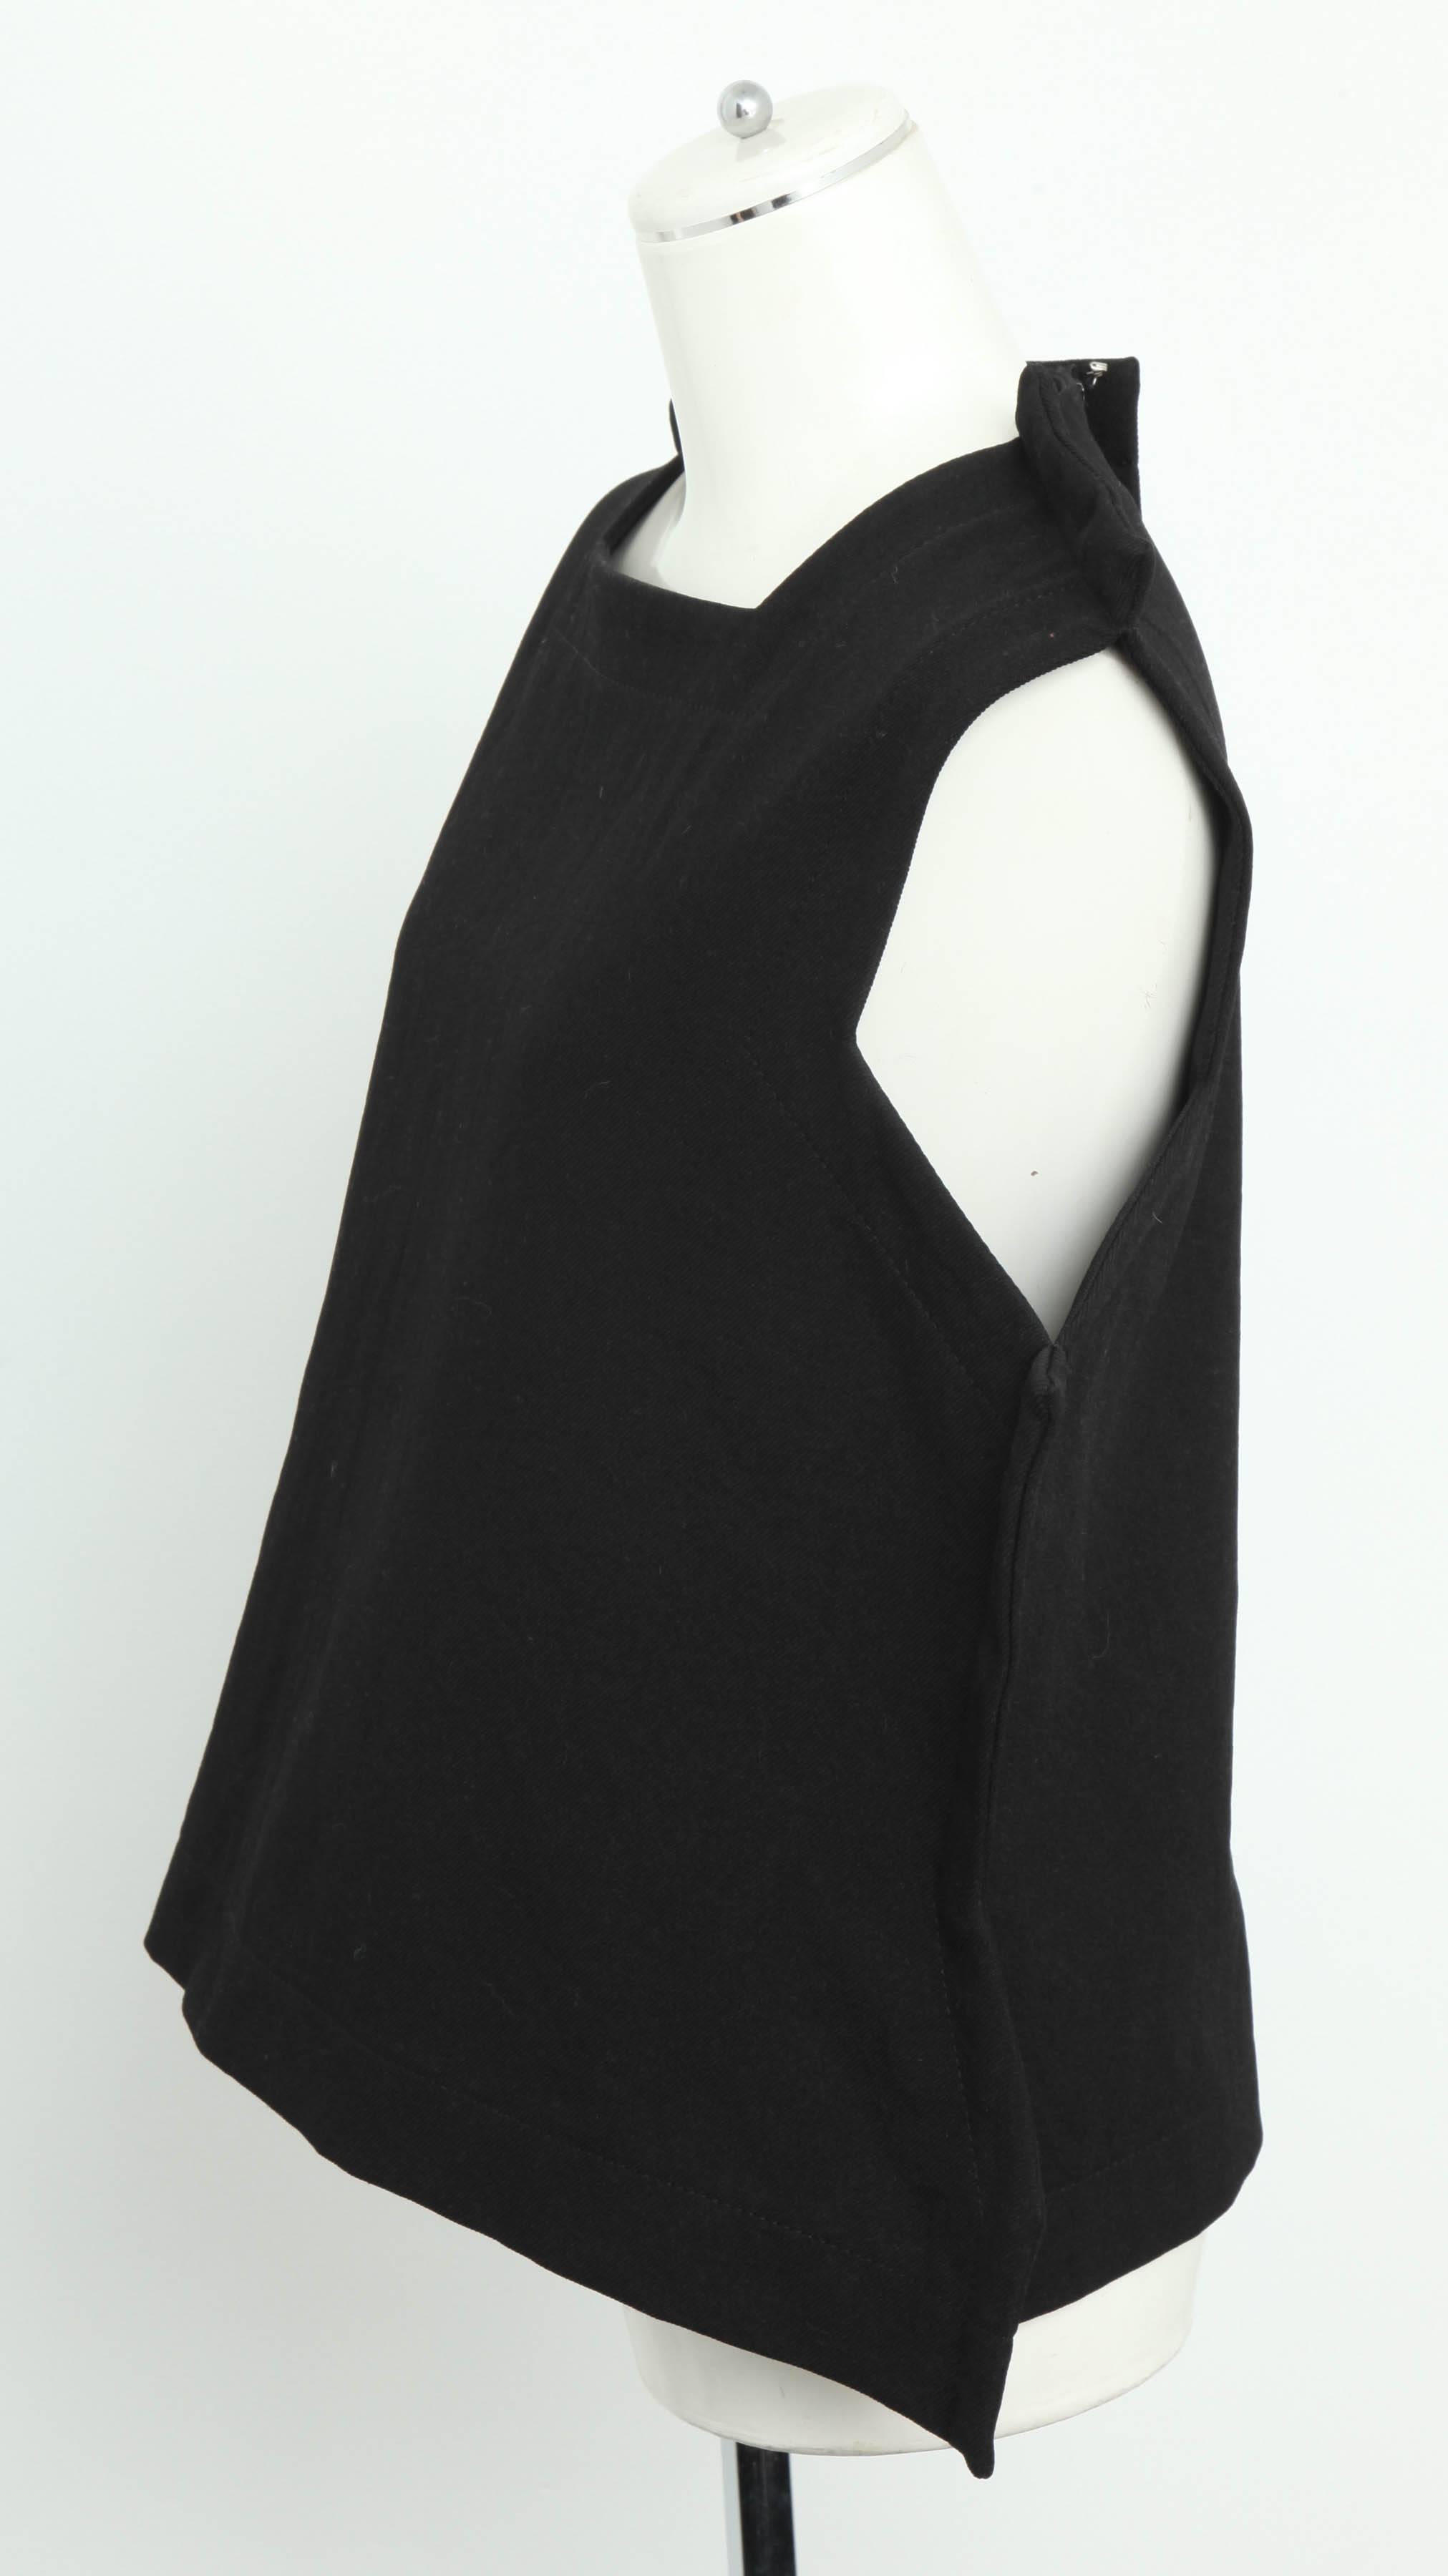 Comme Des Garcons Rare Black Top from 2 Dimensional Collection im Zustand „Gut“ im Angebot in Chicago, IL